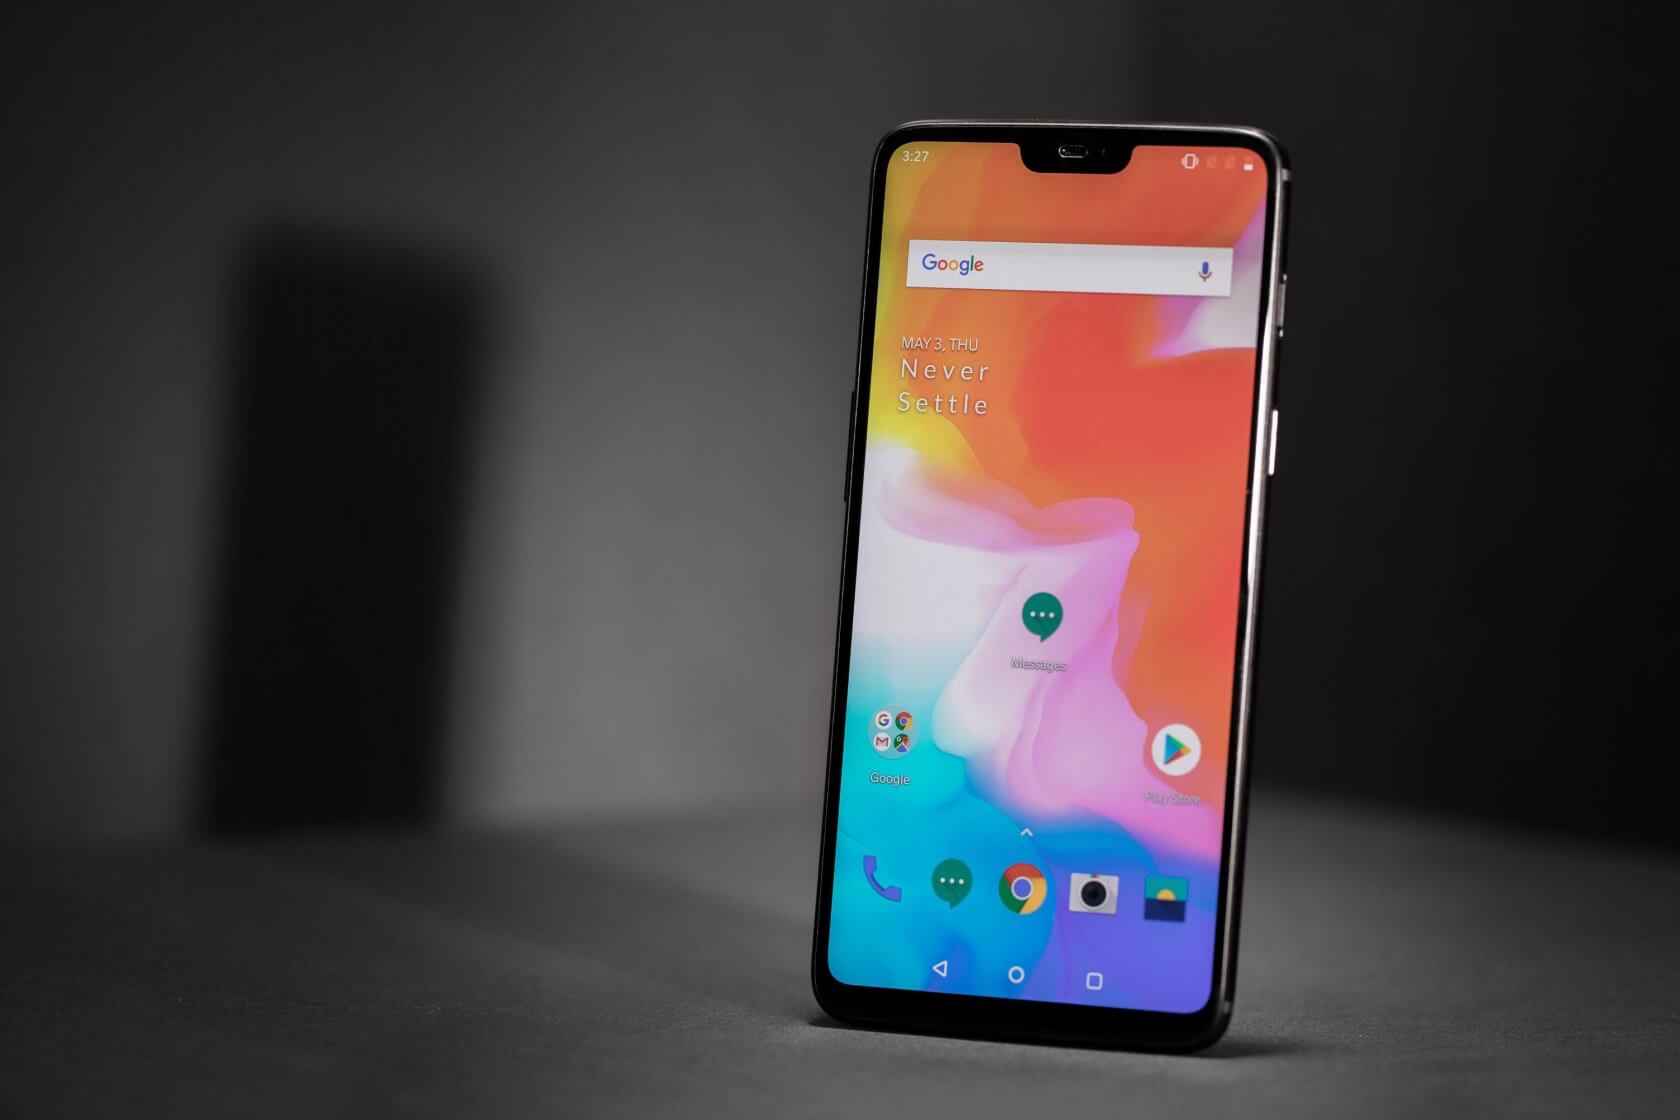 OnePlus may reveal a gaming-focused 5G smartphone prototype at MWC